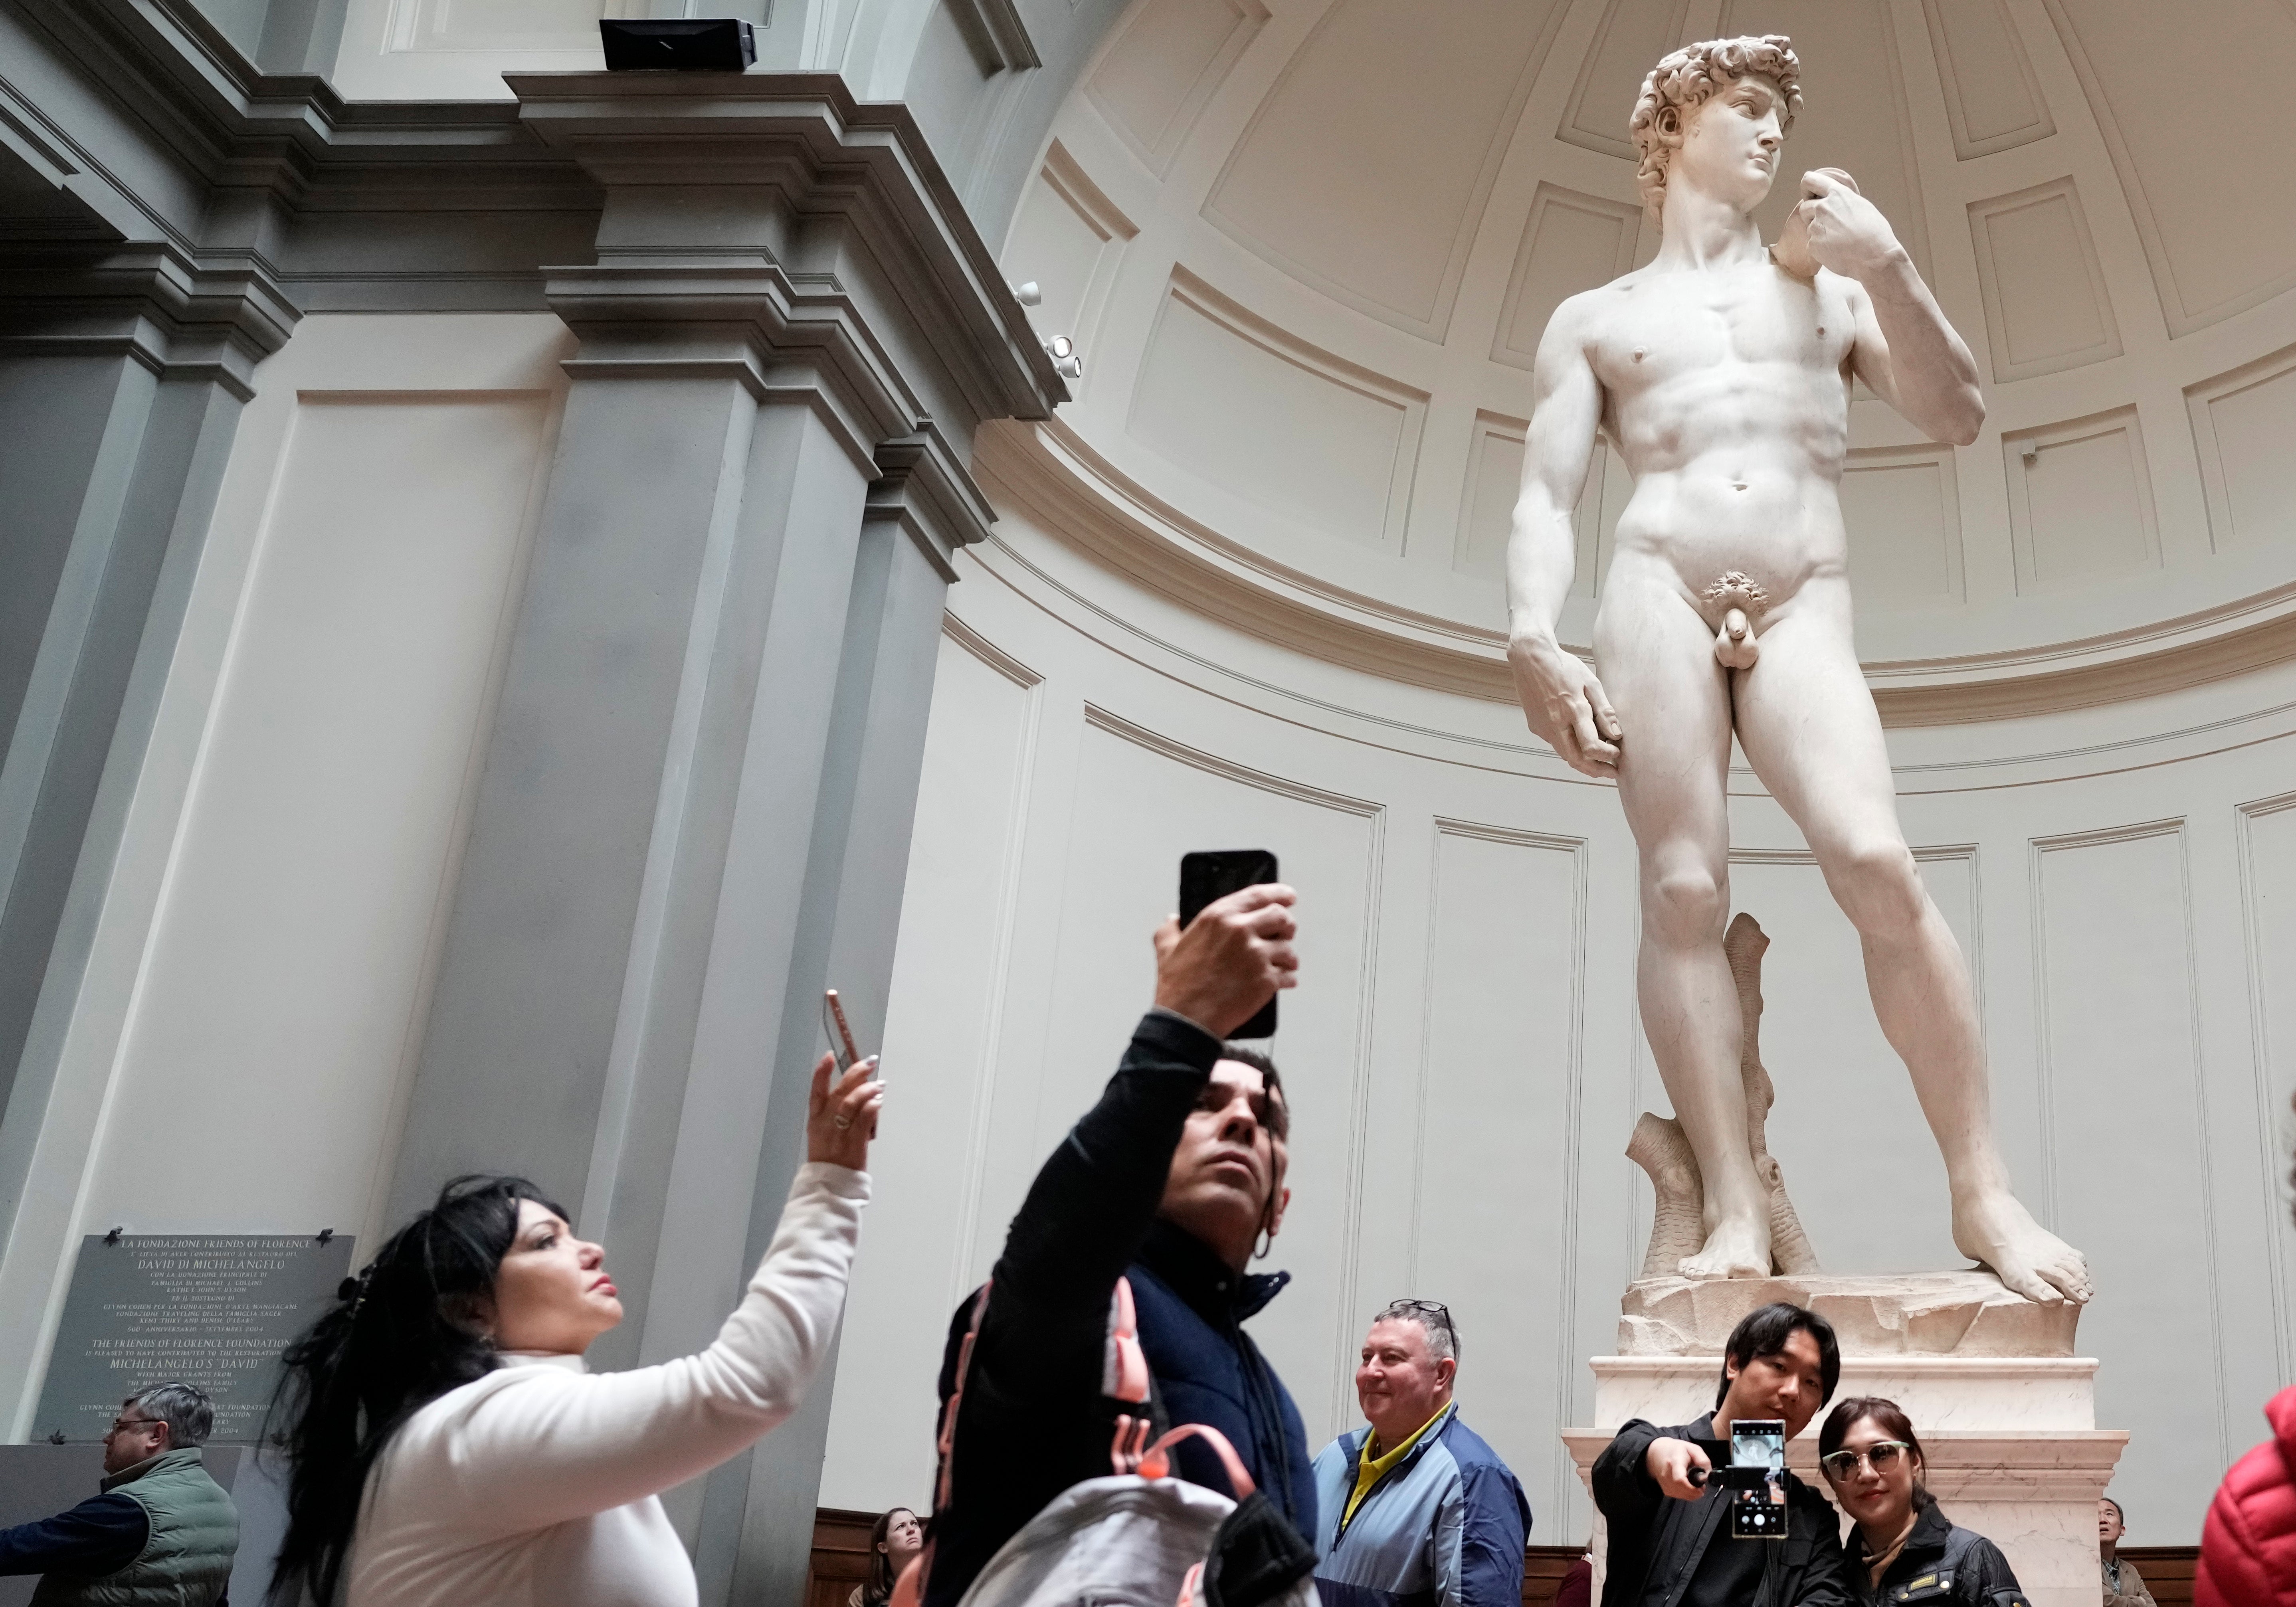 plyndringer Gymnast skuffe Tourists flock to see Michelangelo's statue of David after Florida  censorship row | The Independent